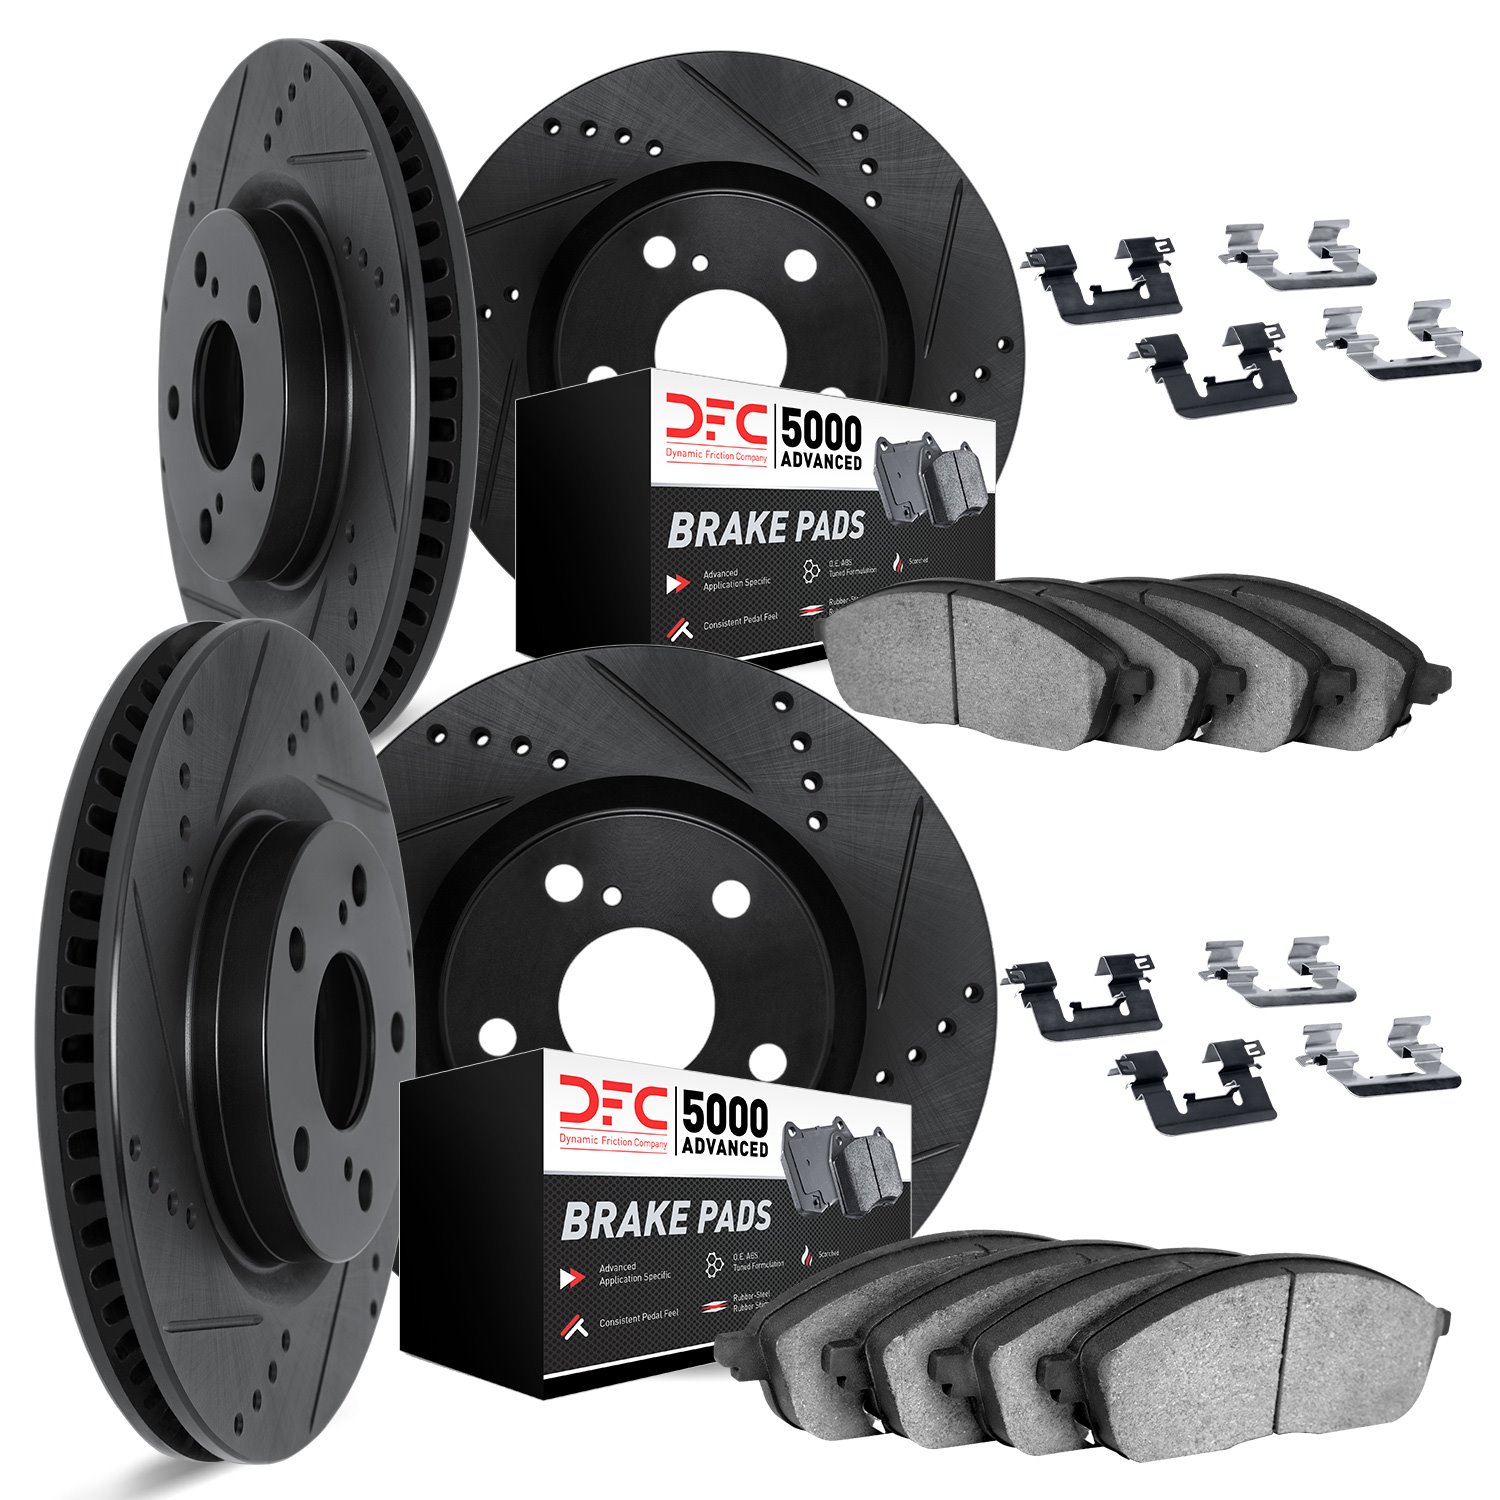 8514-31055 Drilled/Slotted Brake Rotors w/5000 Advanced Brake Pads Kit & Hardware [Black], 2007-2010 BMW, Position: Front and Re